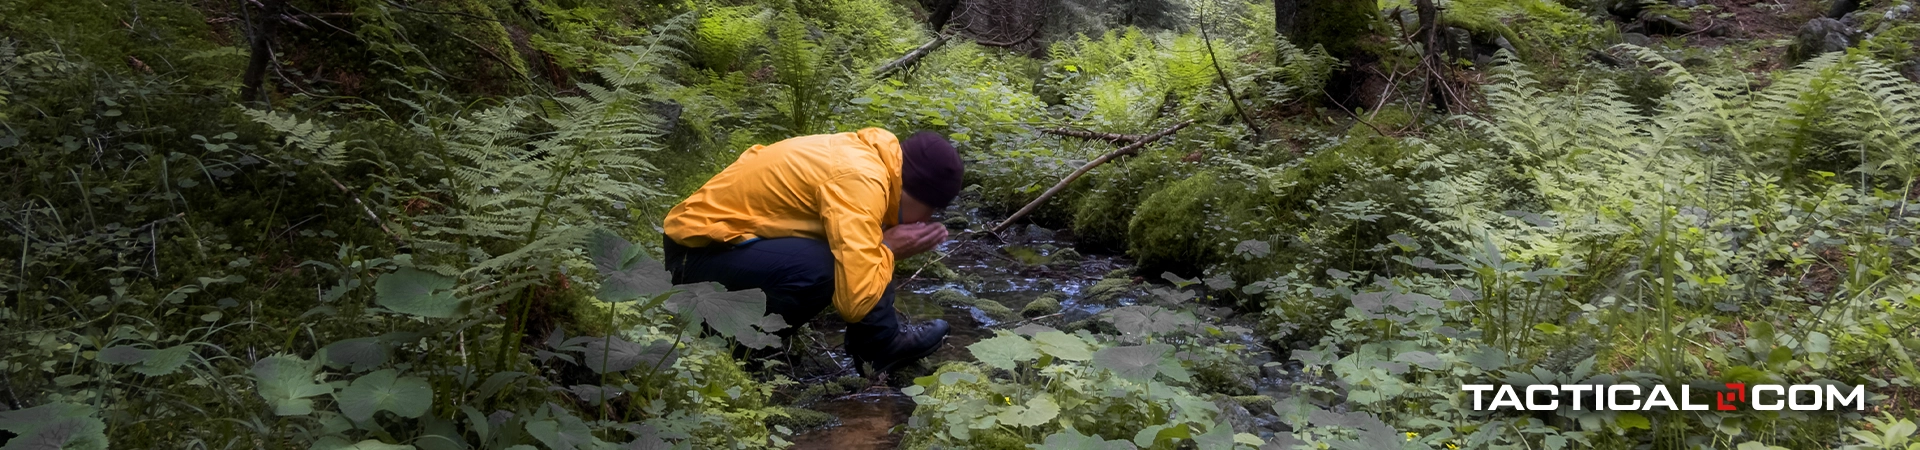 knowing how to find water in the wild is an essential survival skill